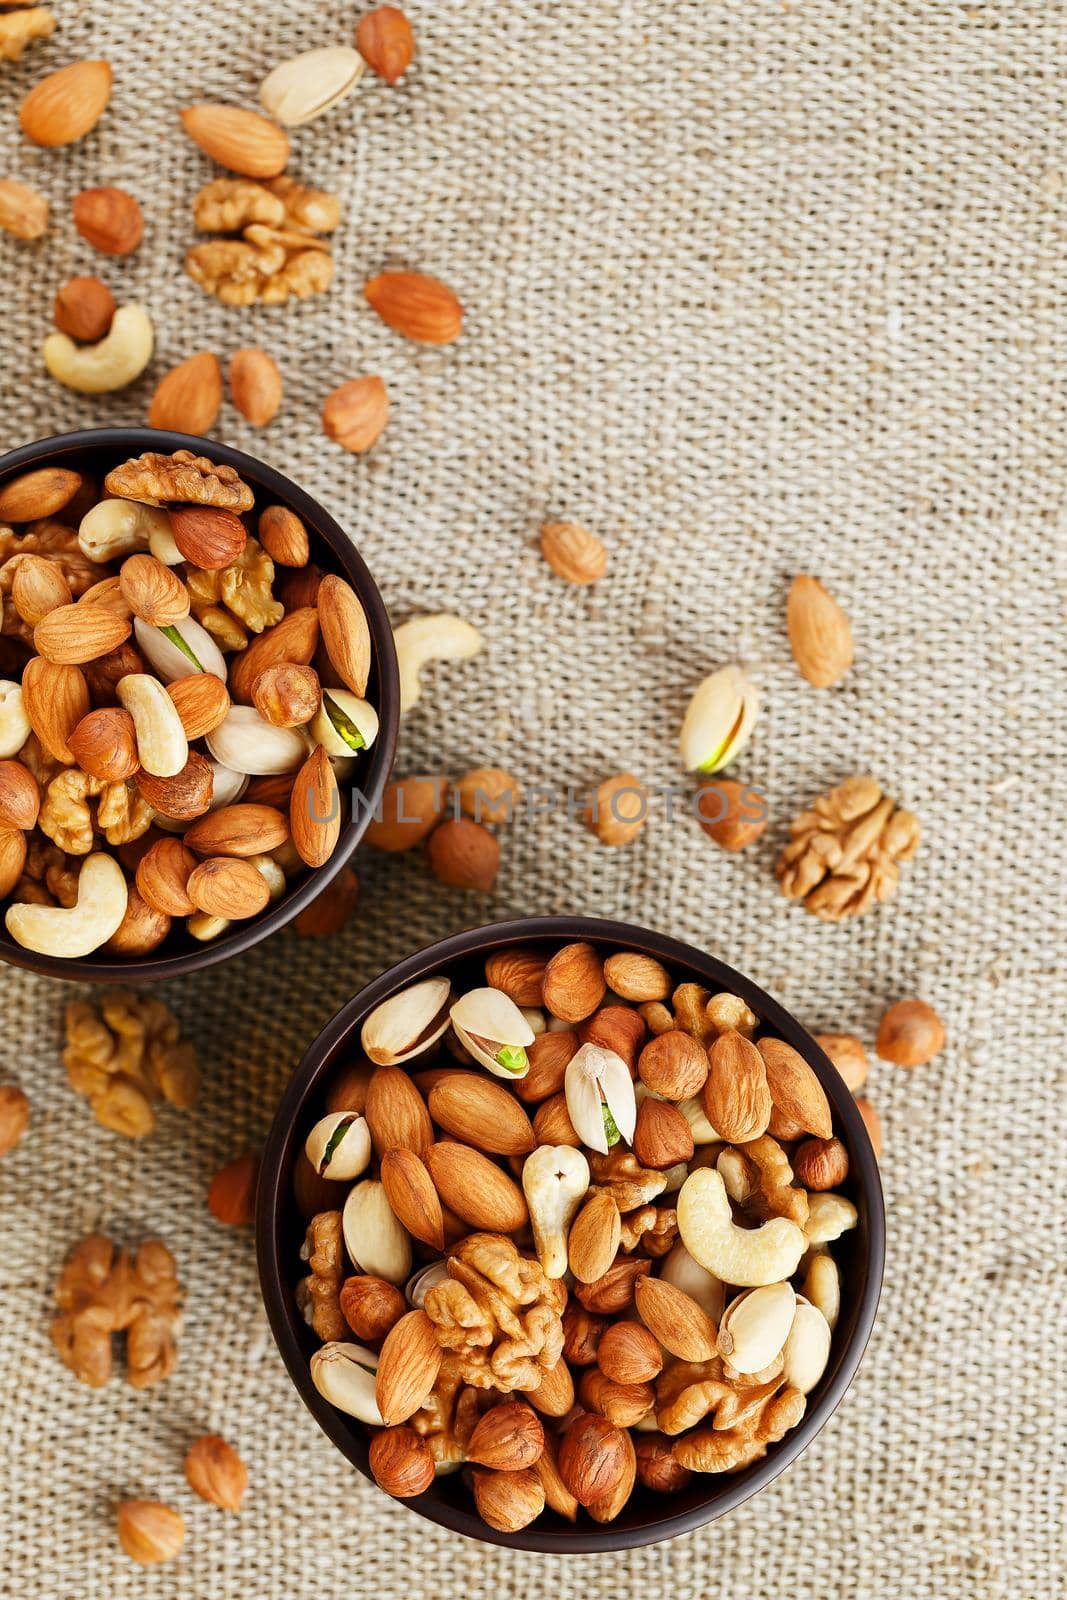 A mixture of cashew nuts, almond nuts, pistachios, hazelnuts and walnuts in a wooden cup against the background of burlap fabric. Nuts as structure and background, macro. Two cups of nuts.